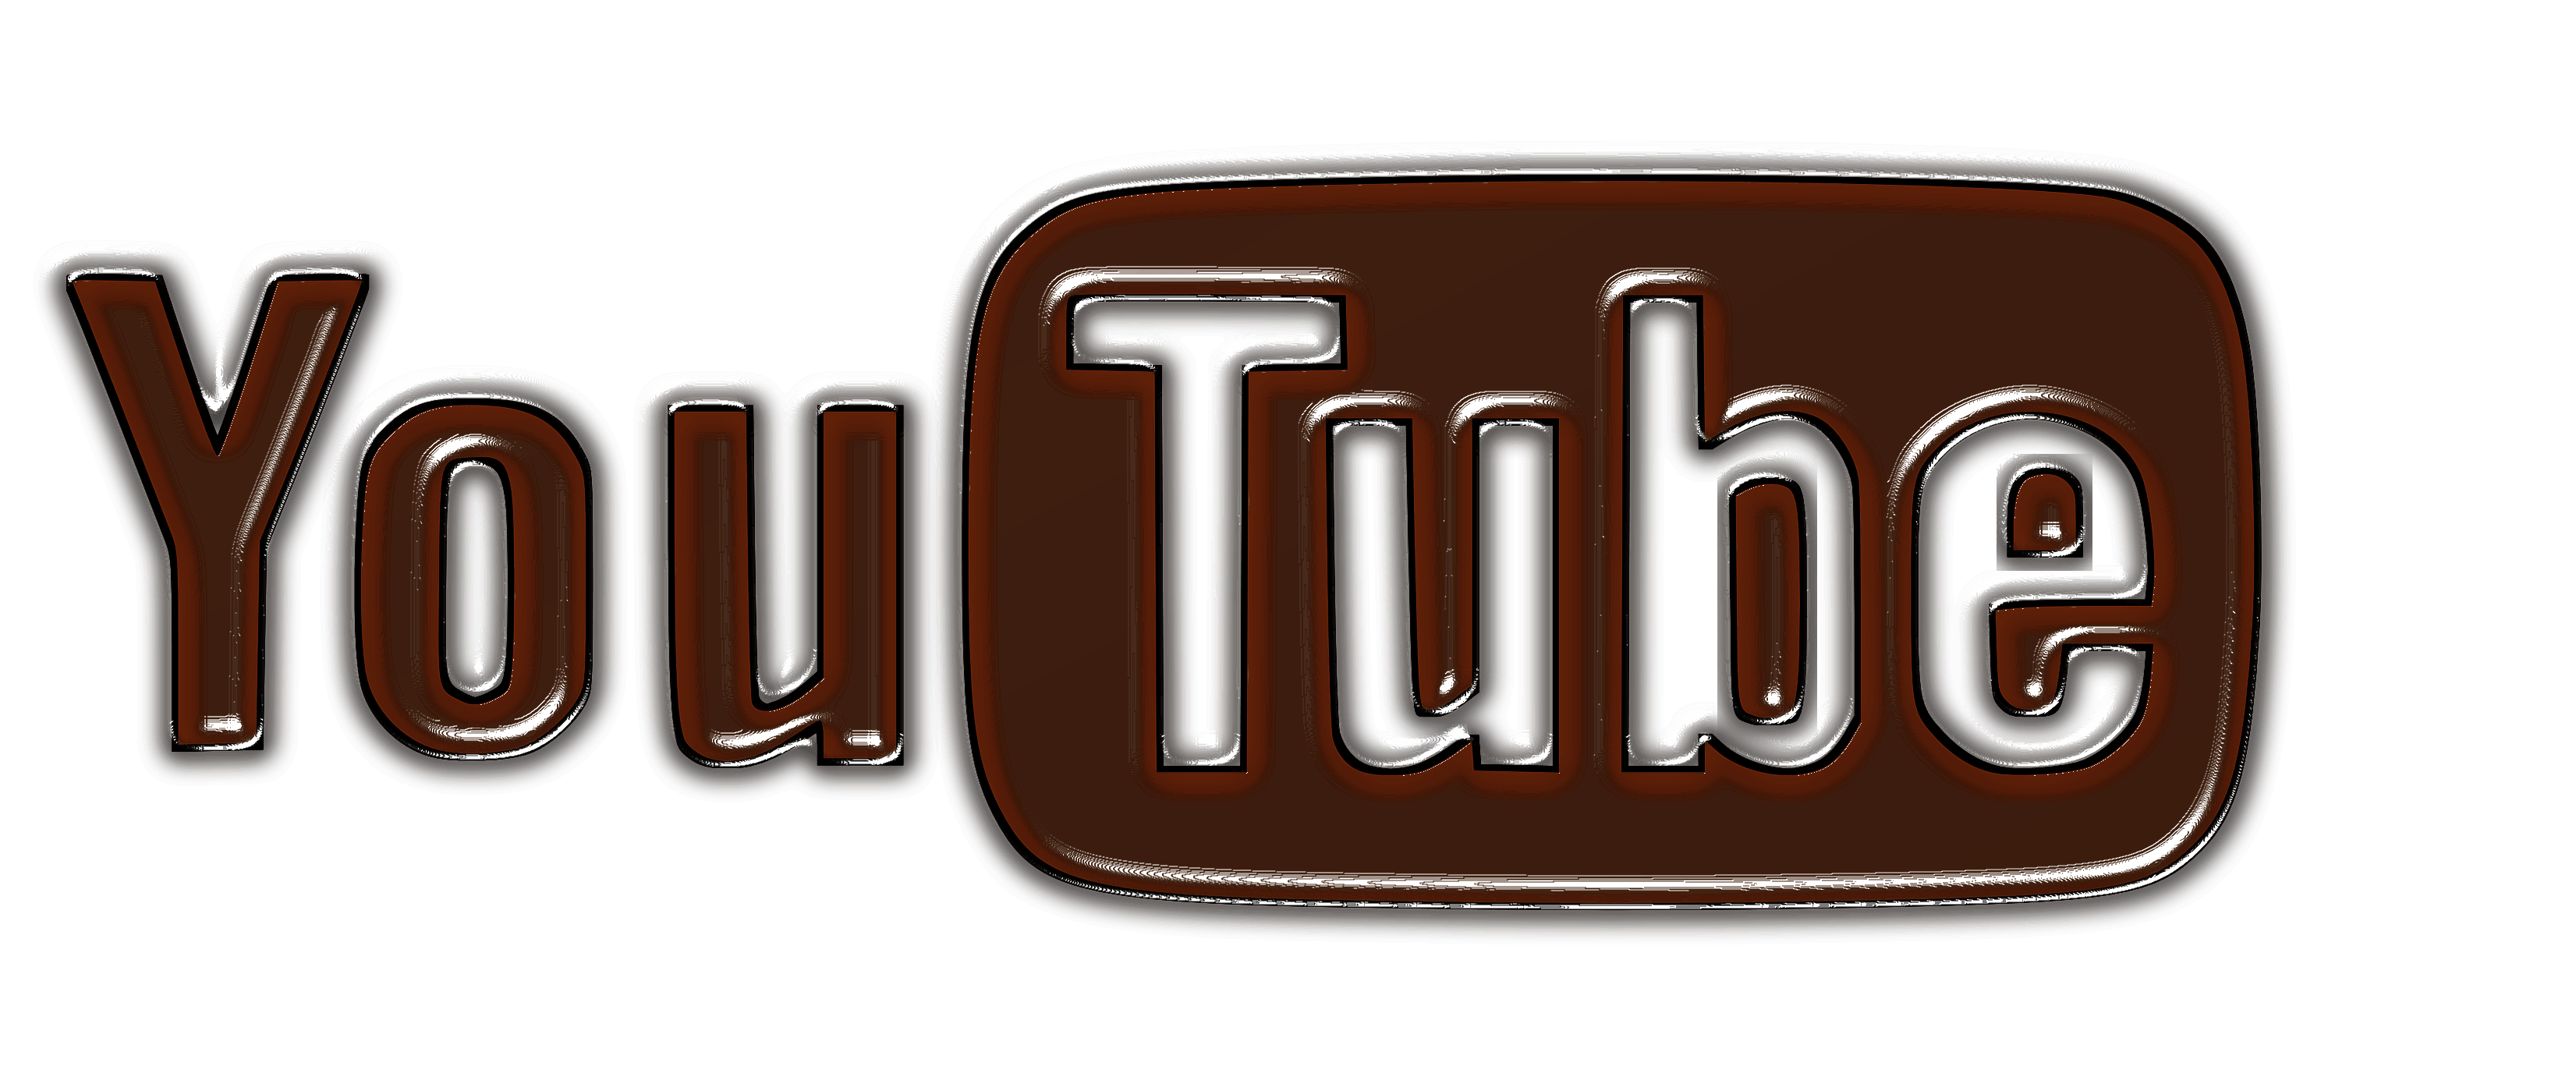 Brown YouTube Logo - Brown and white logo of YouTube free image